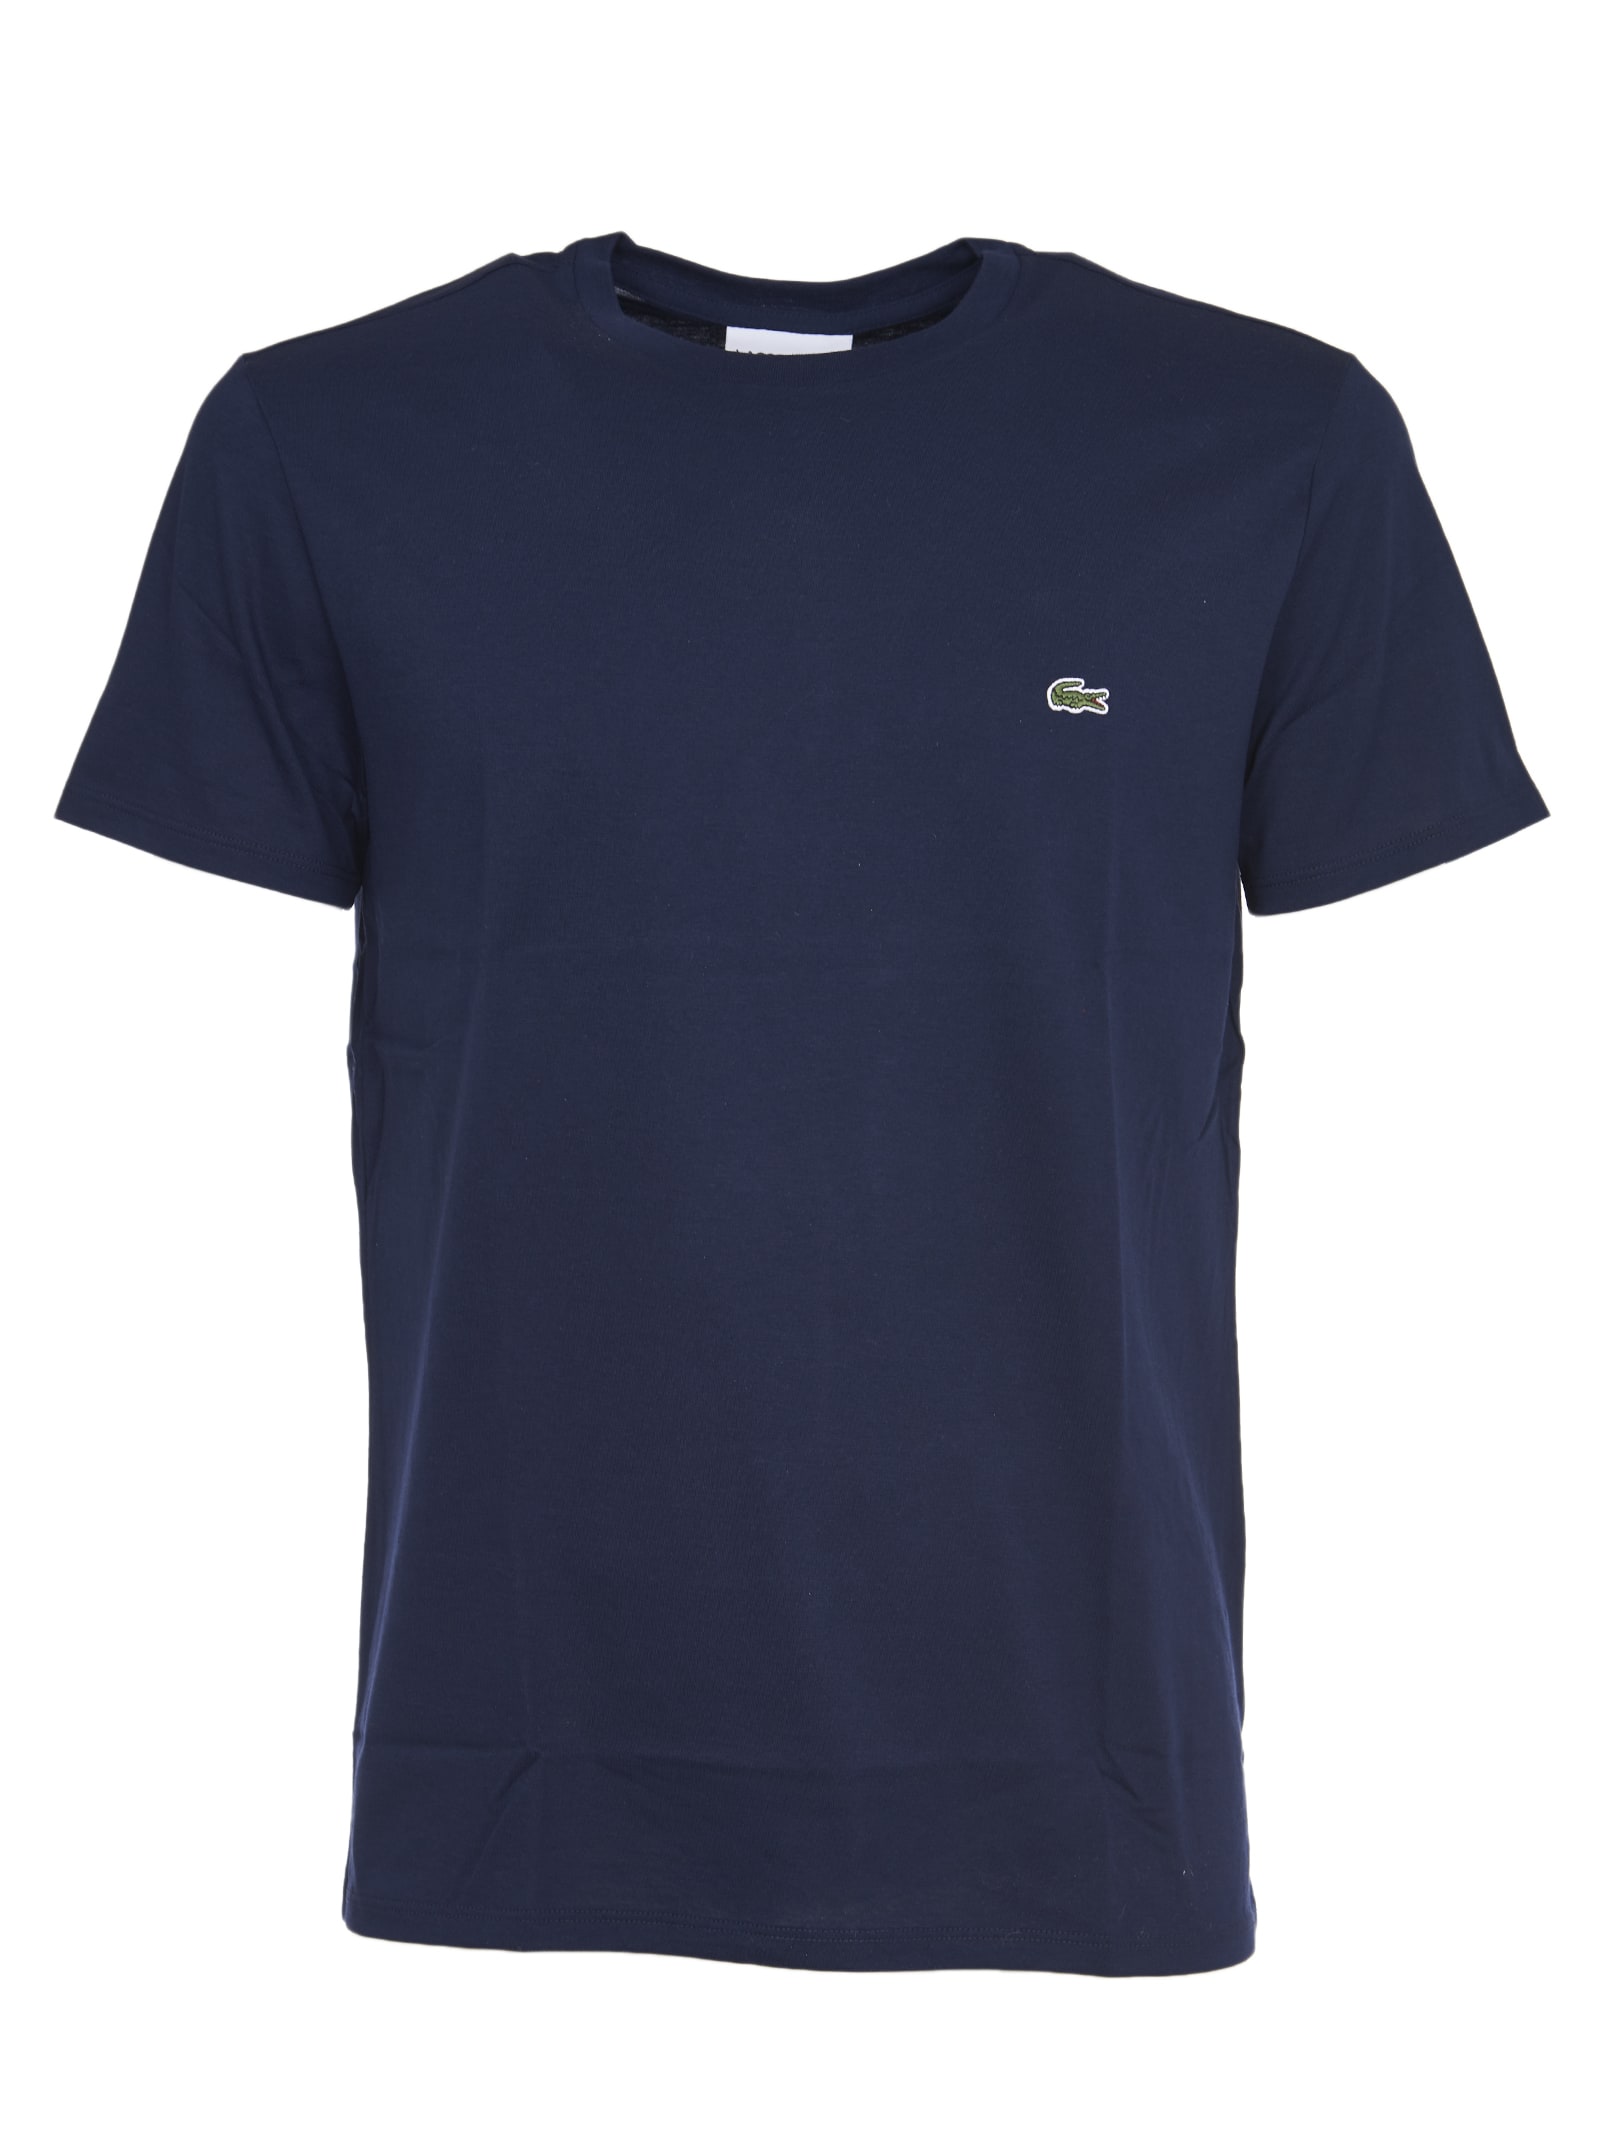 lacoste clothing sale